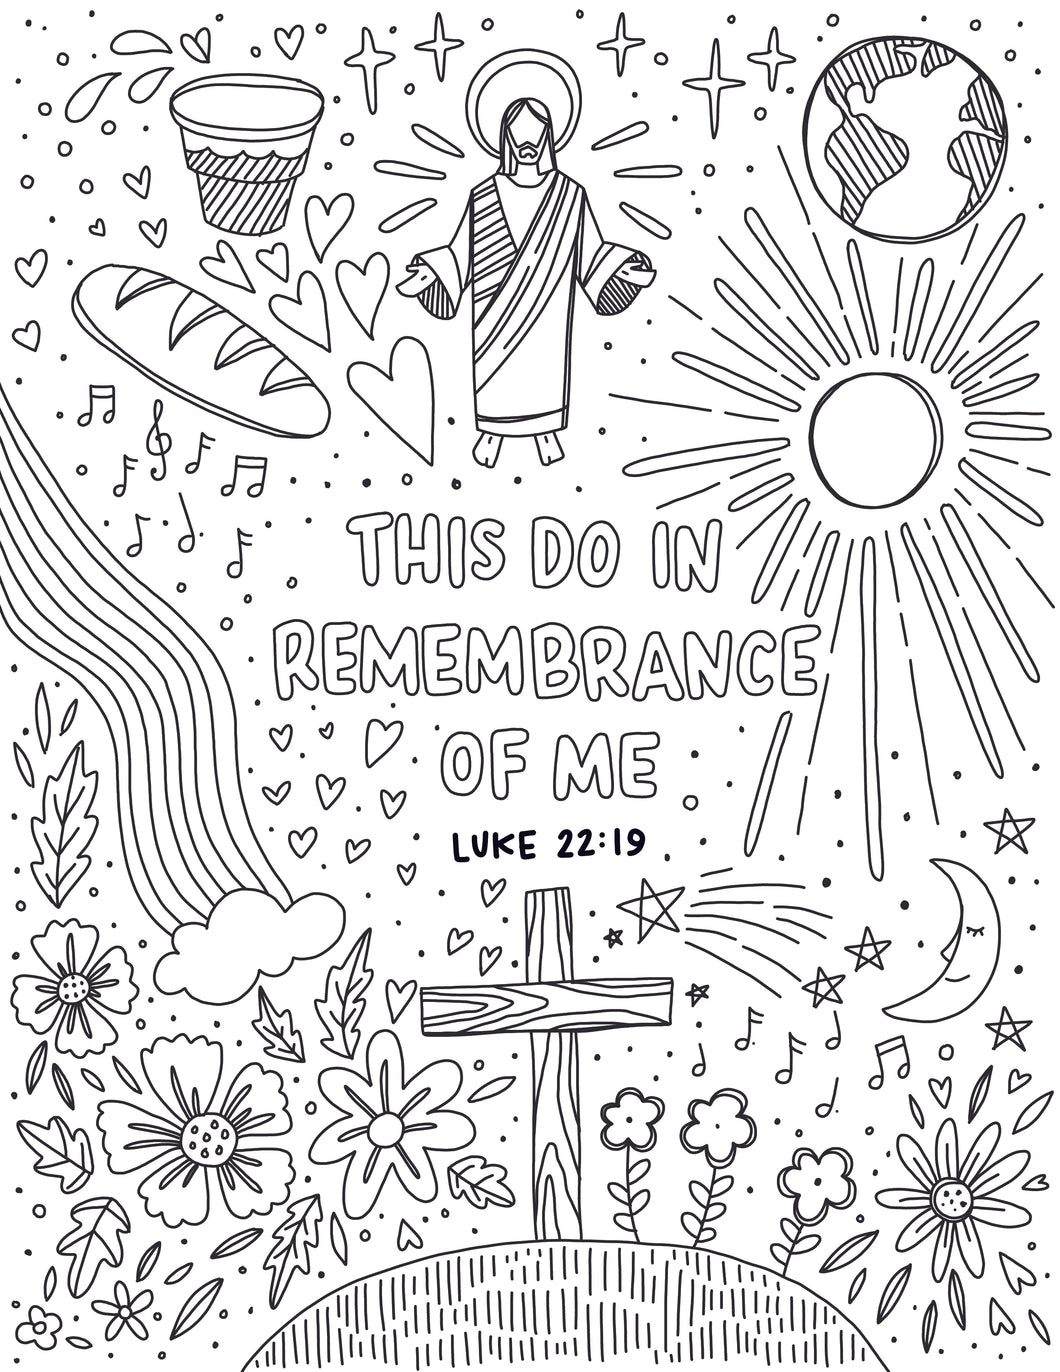 In Remembrance of Me - Easter Coloring Page